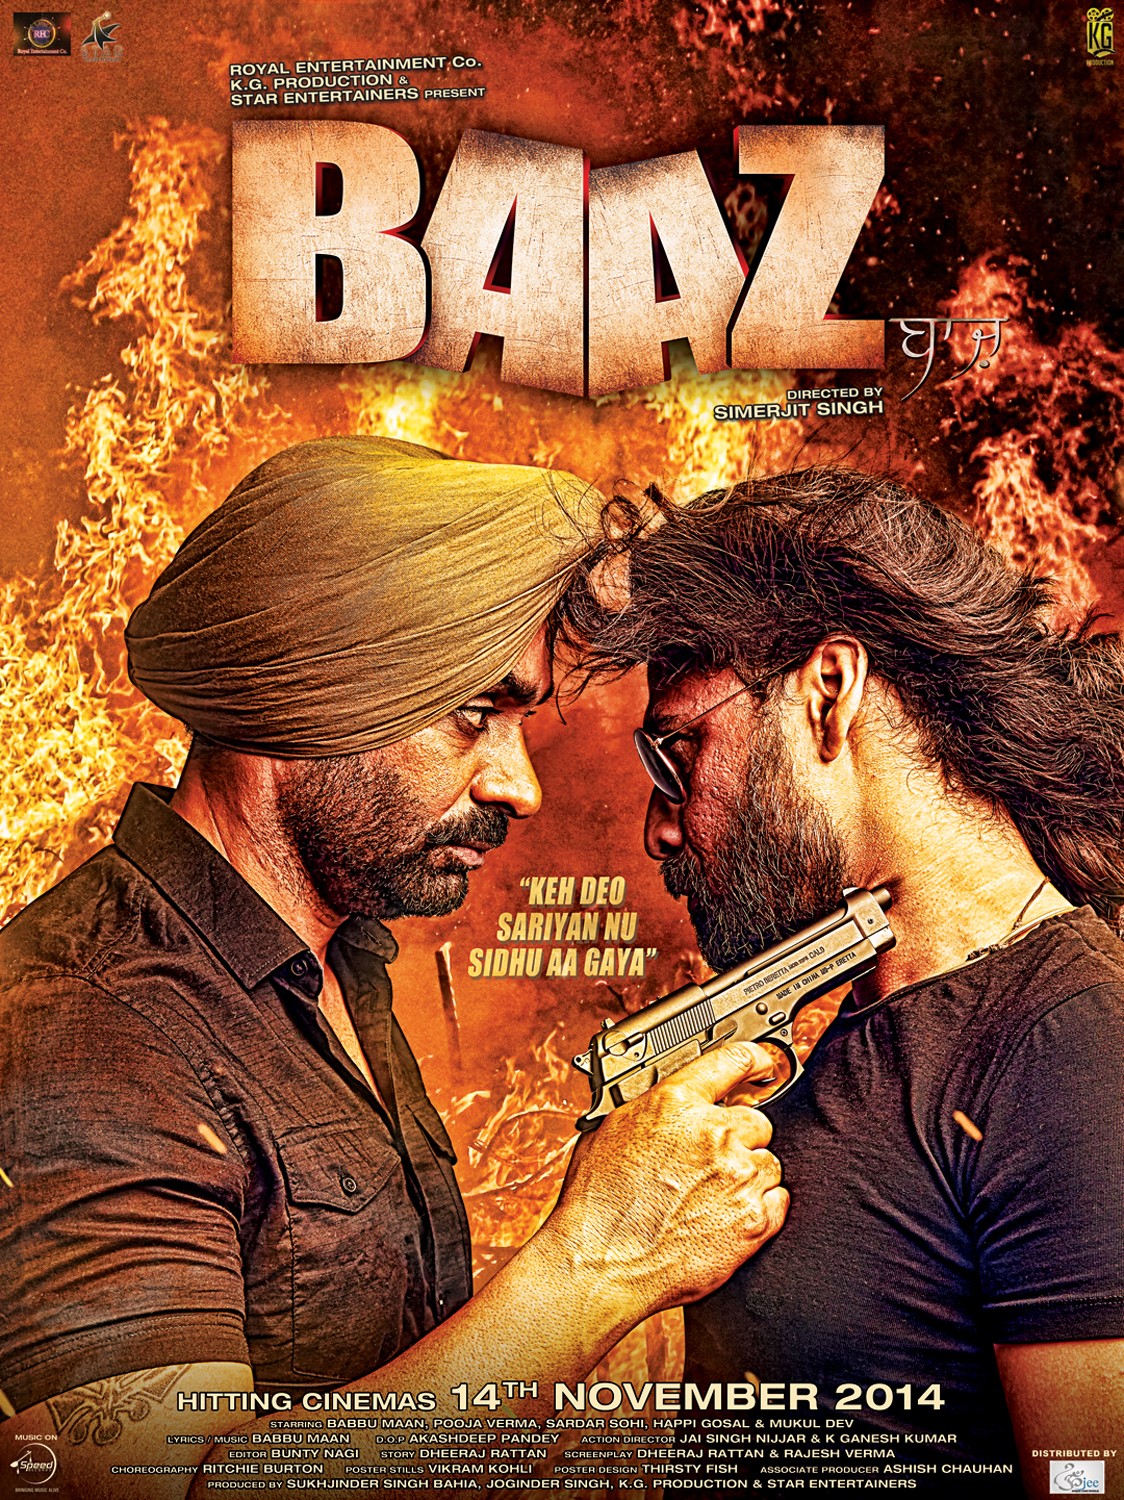 Extra Large Movie Poster Image for Baaz (#1 of 4)